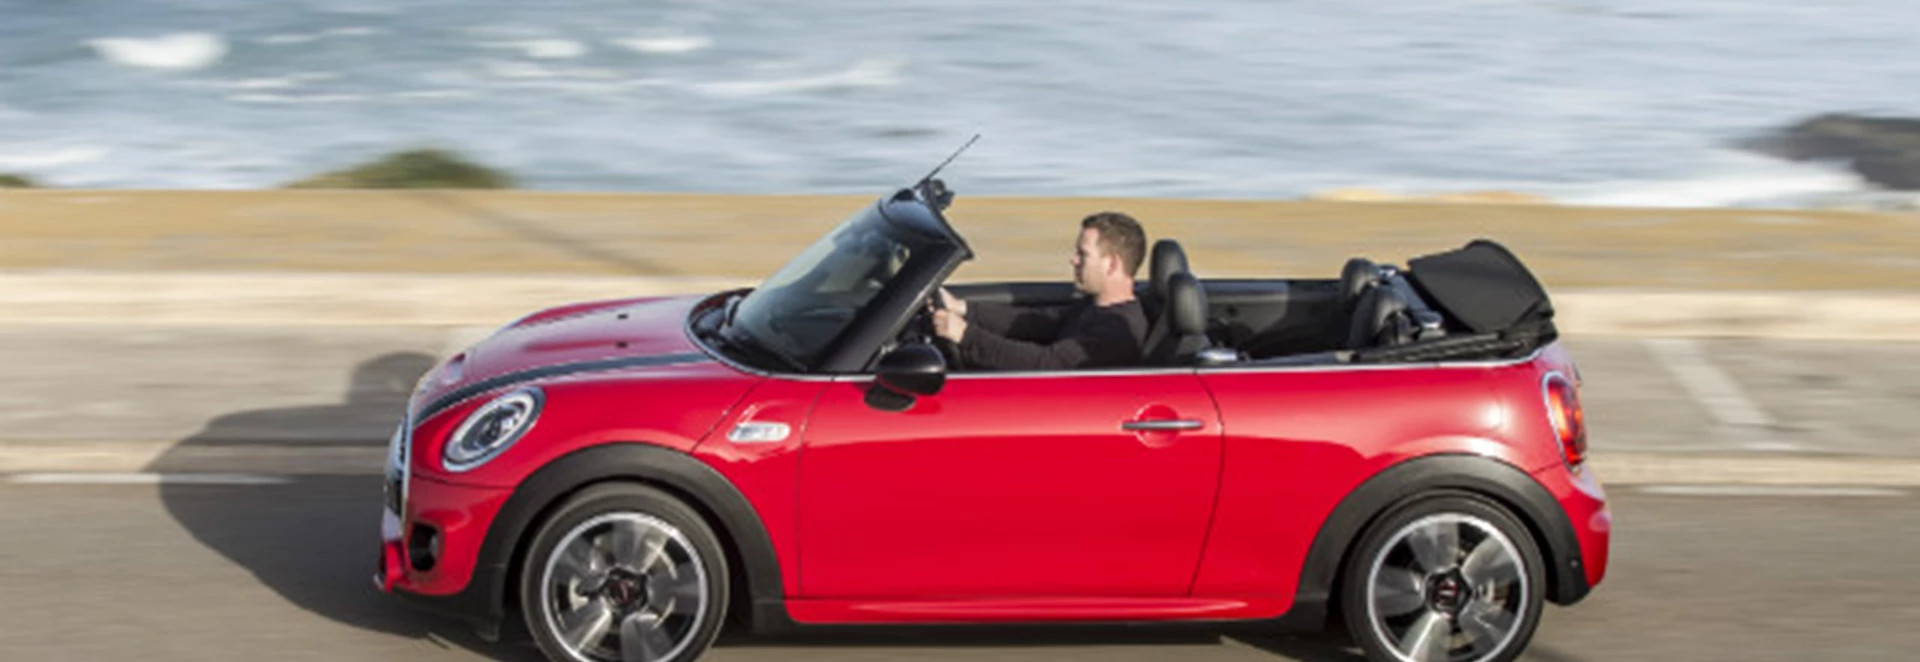 Five myths about owning a convertible debunked 